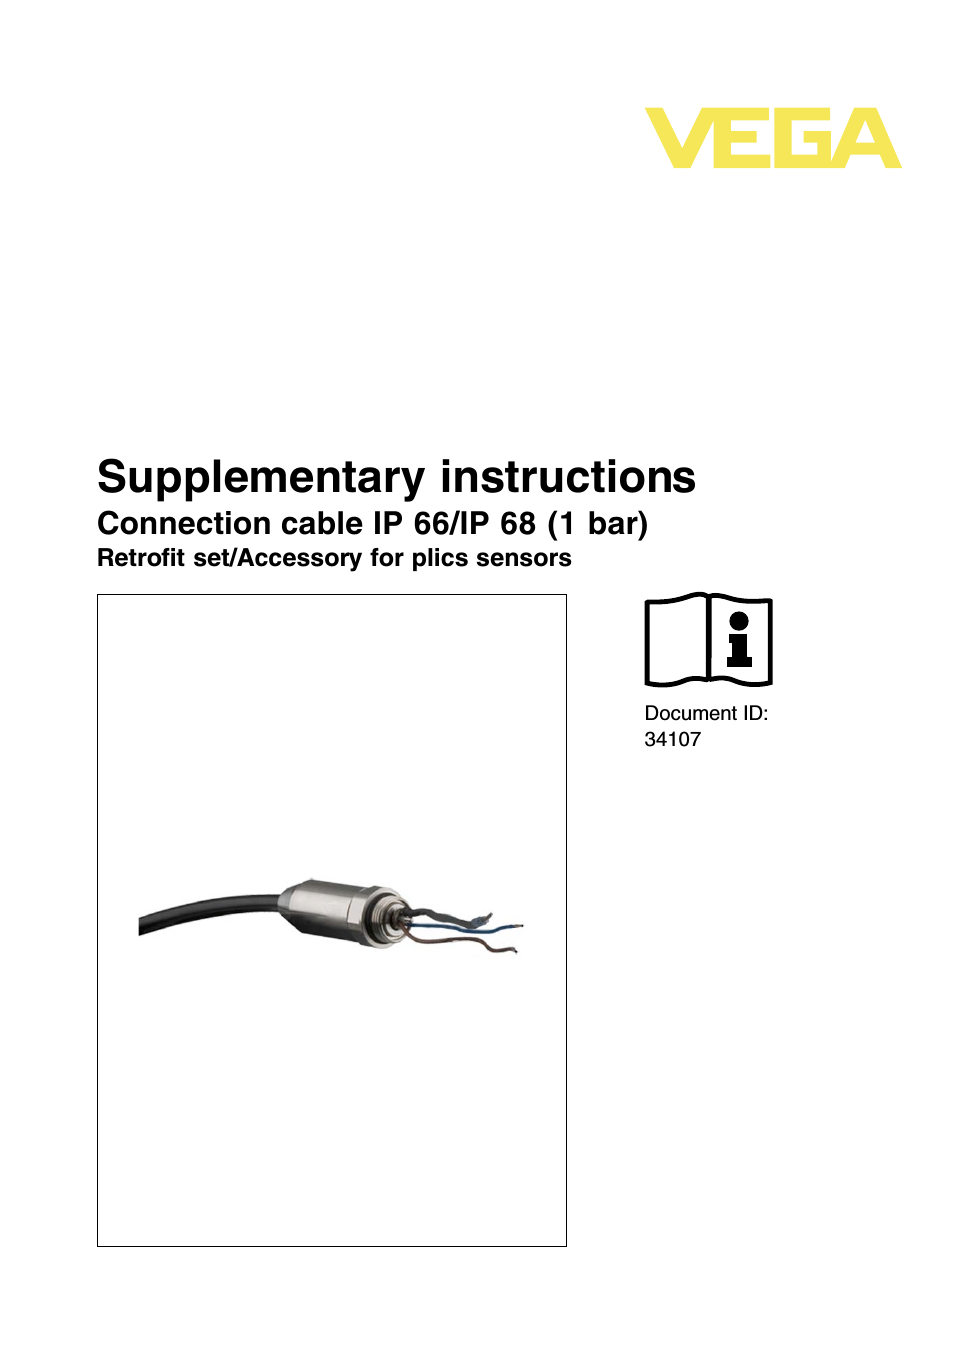 Connection cable IP 66_IP 68 (1 bar)